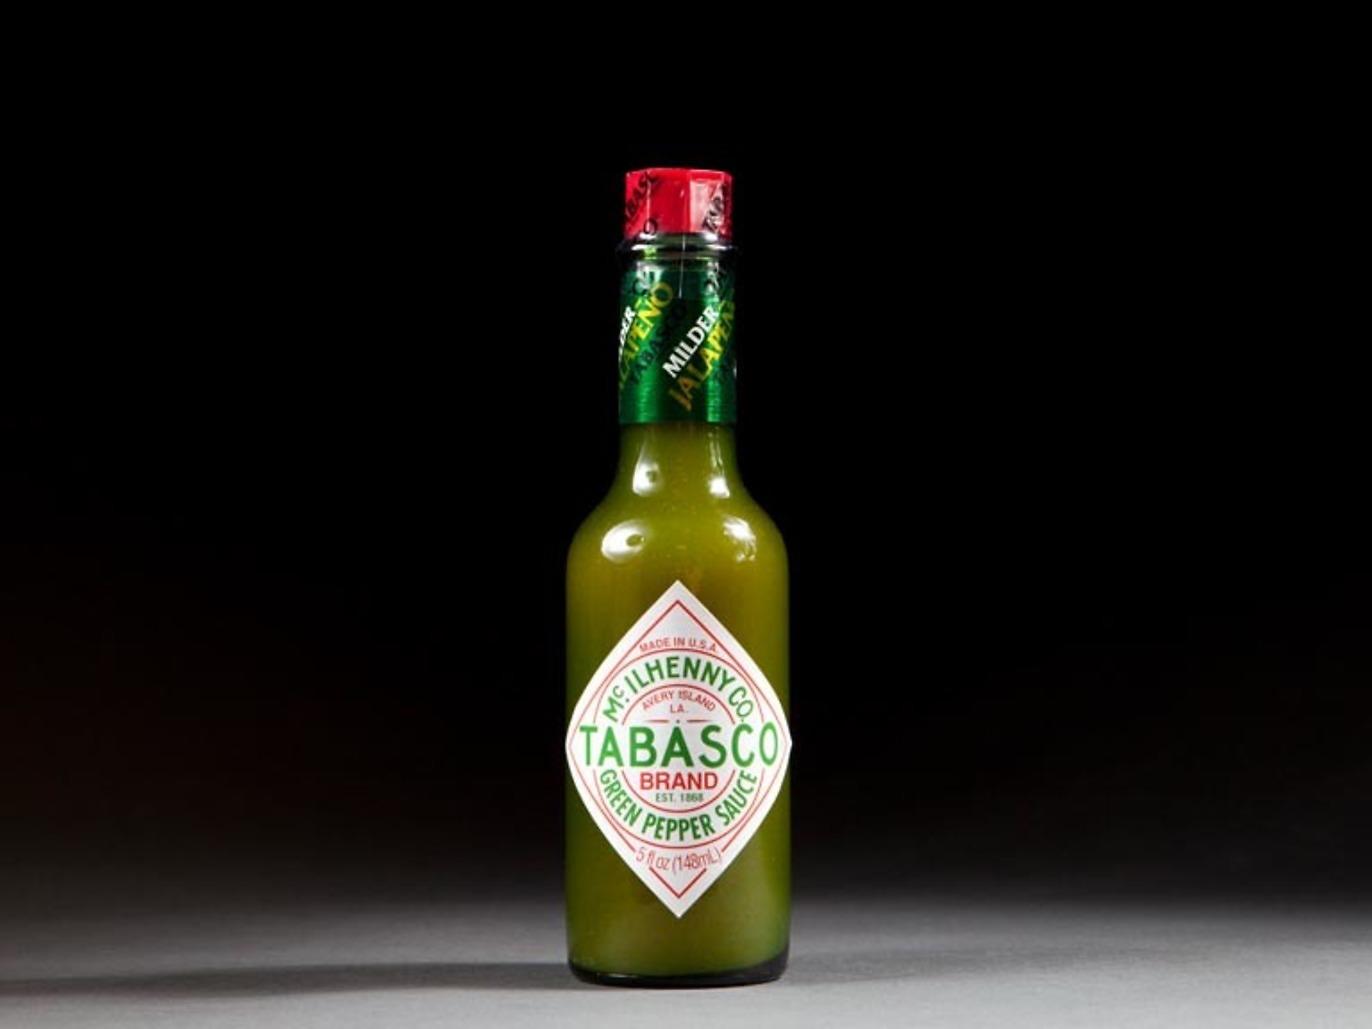 Hot Sauce Taste Test The Best Hot Sauces Ranked